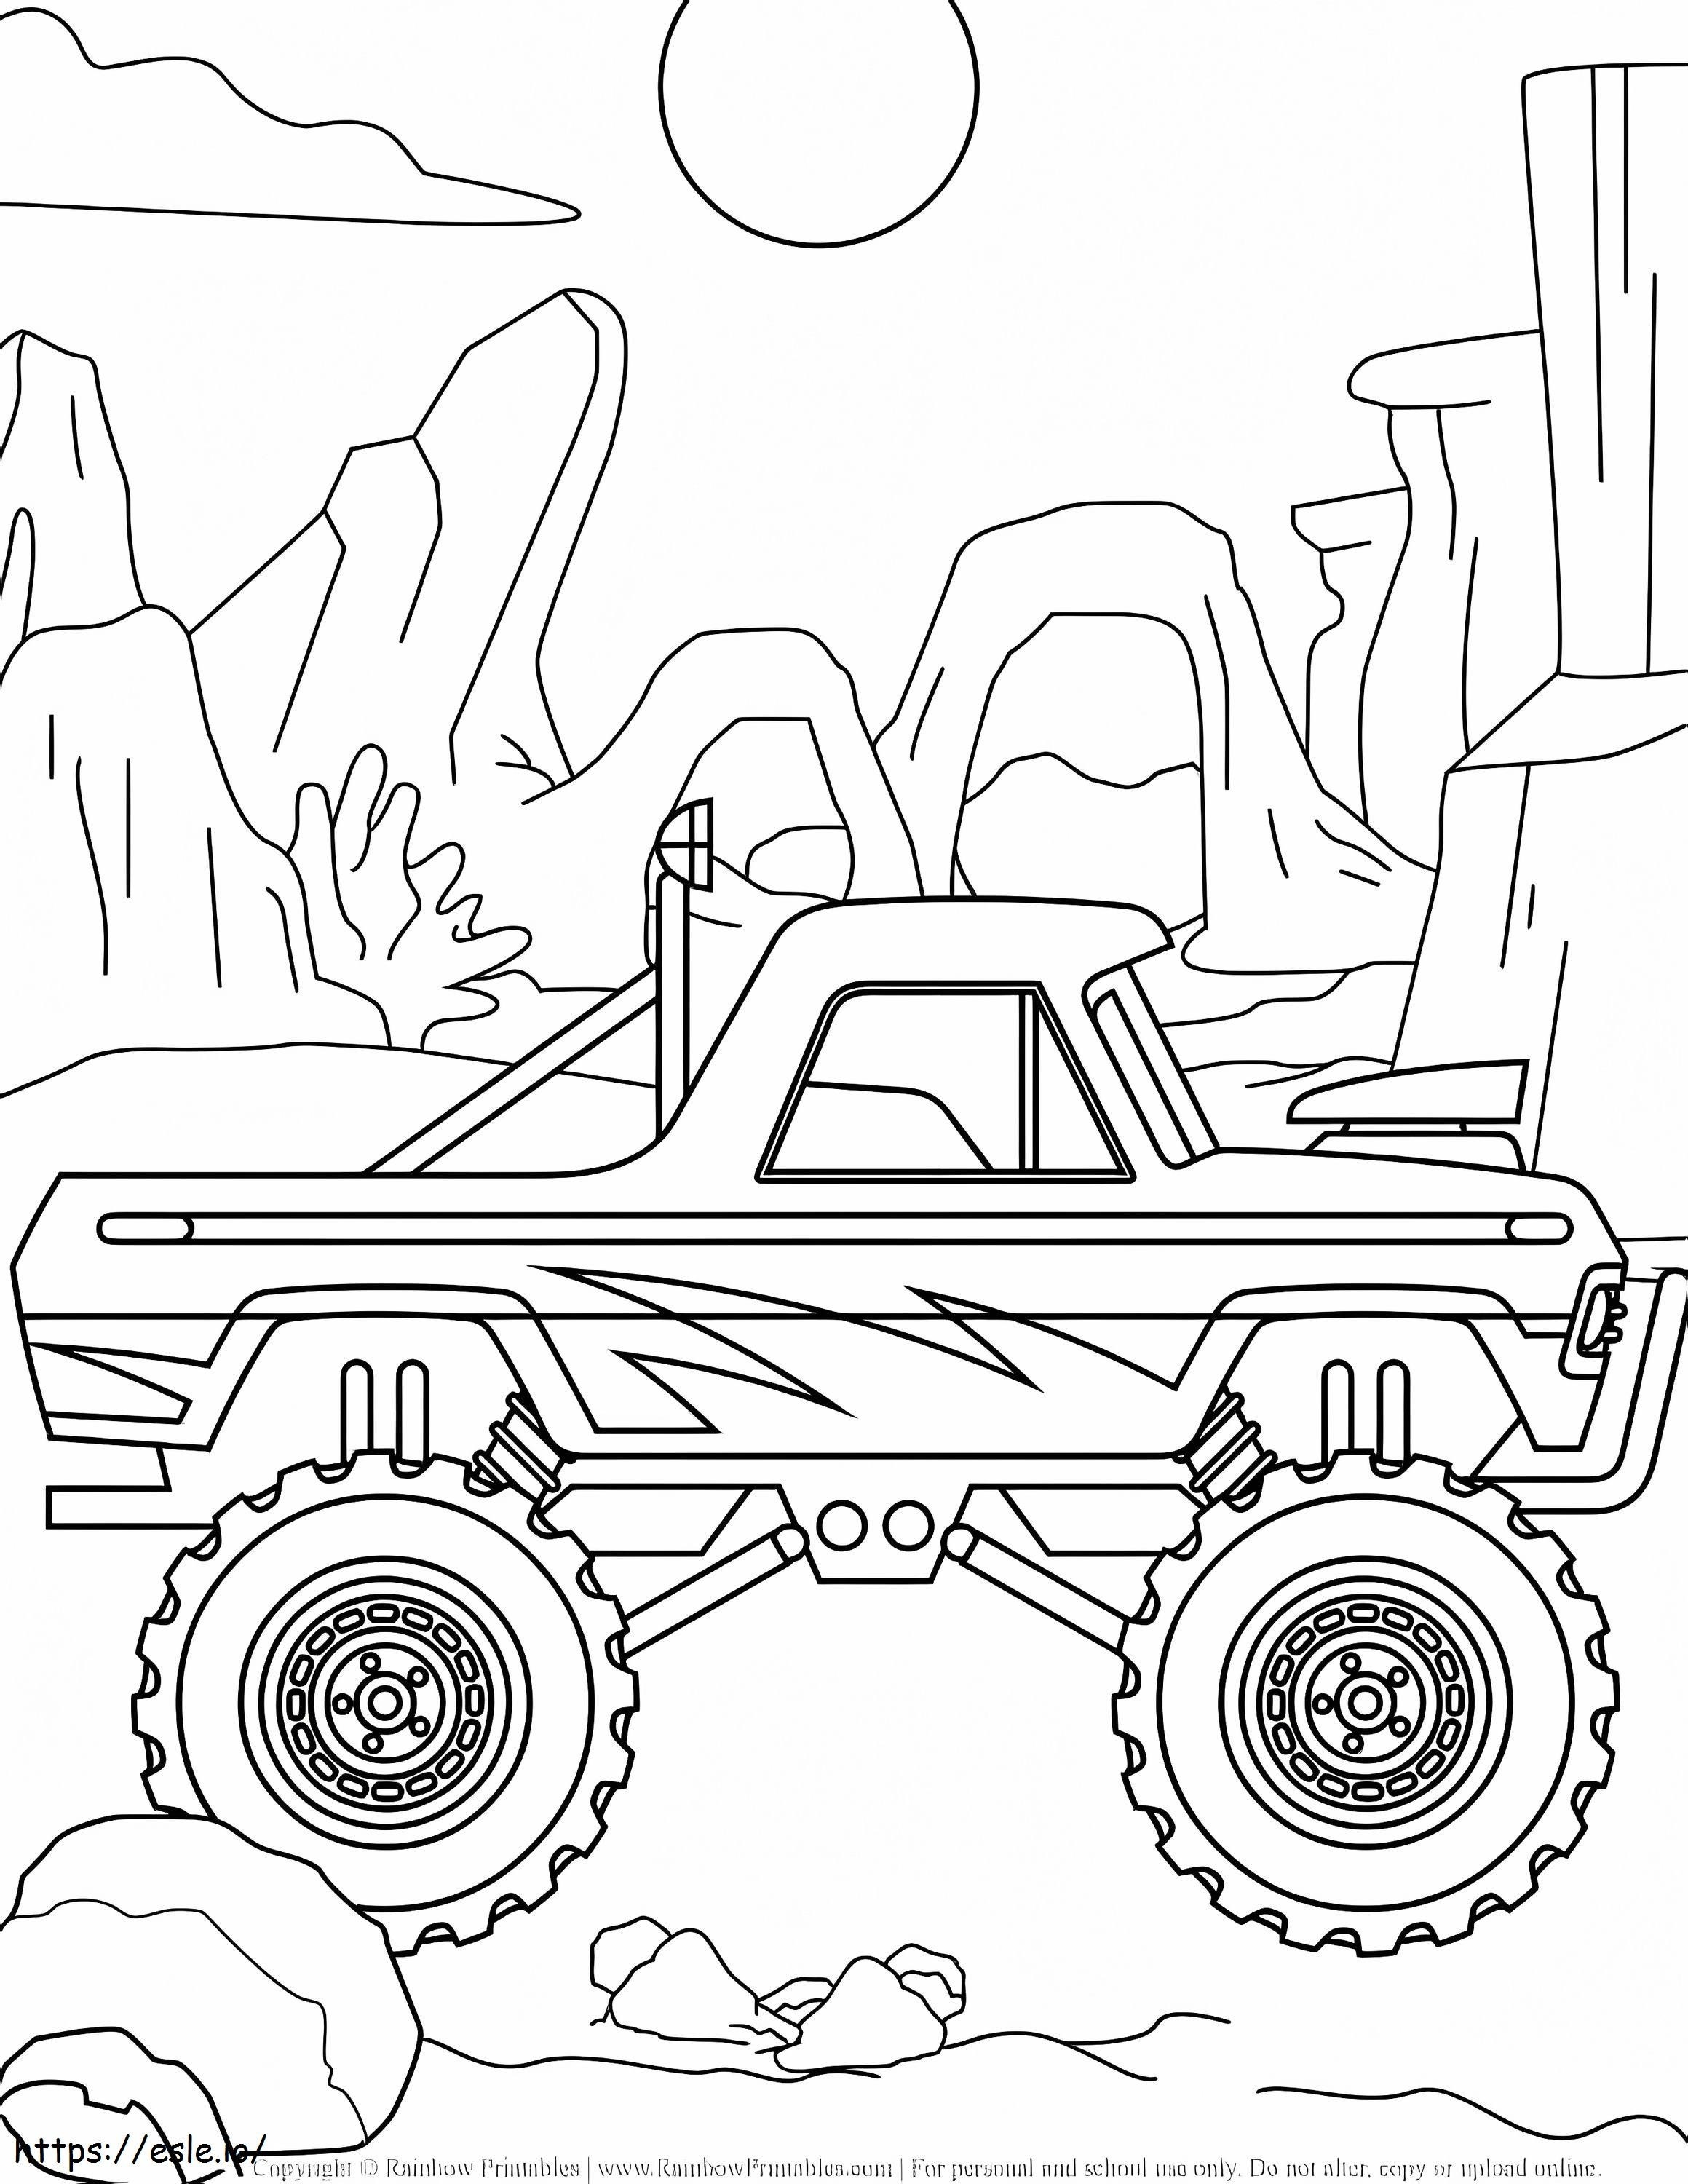 Desert Monster Truck Driving coloring page